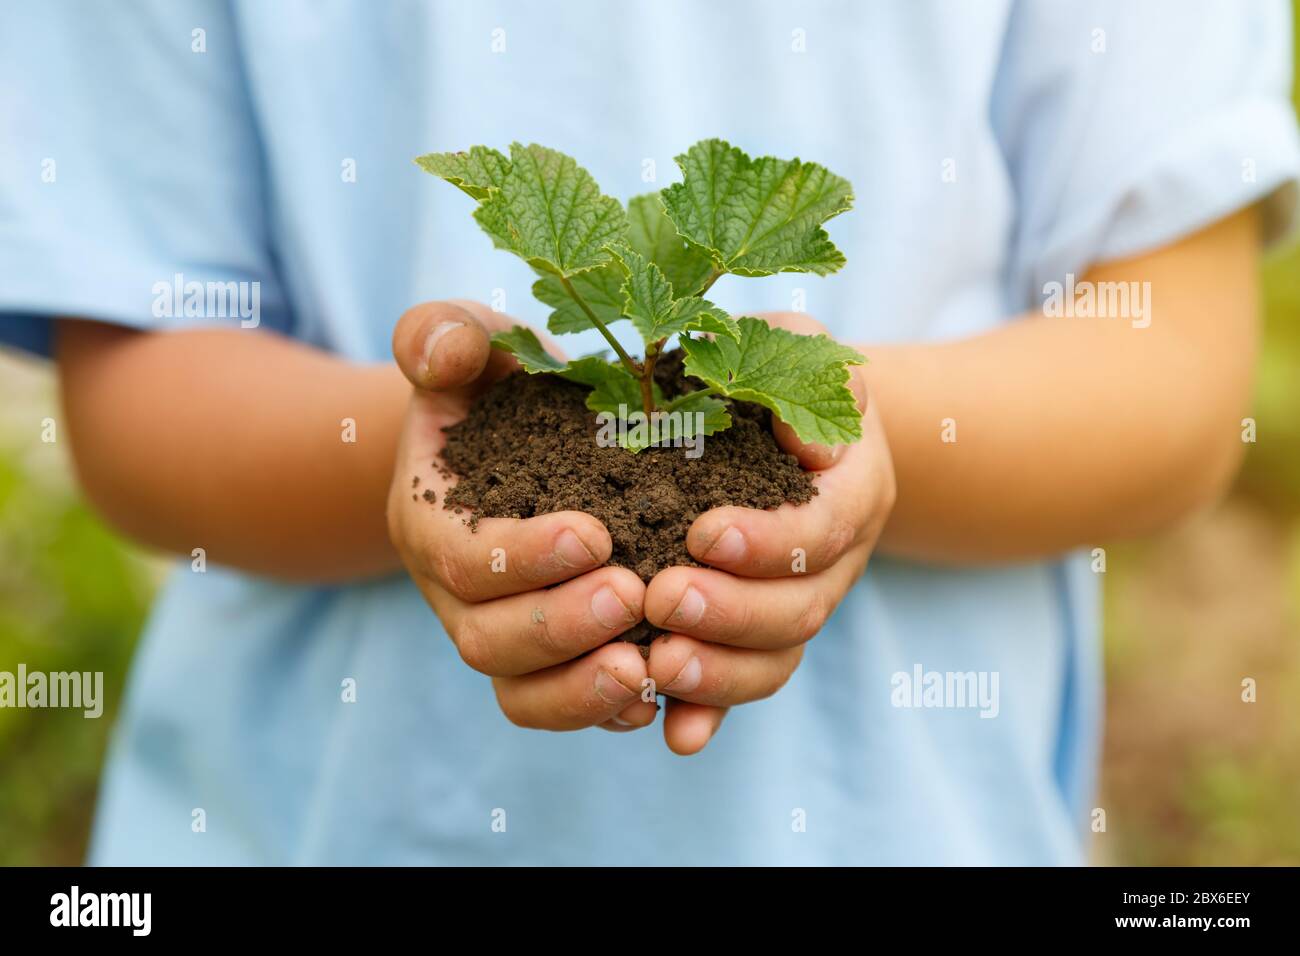 New life plant child hands holding tree nature living concept garden gardening Stock Photo